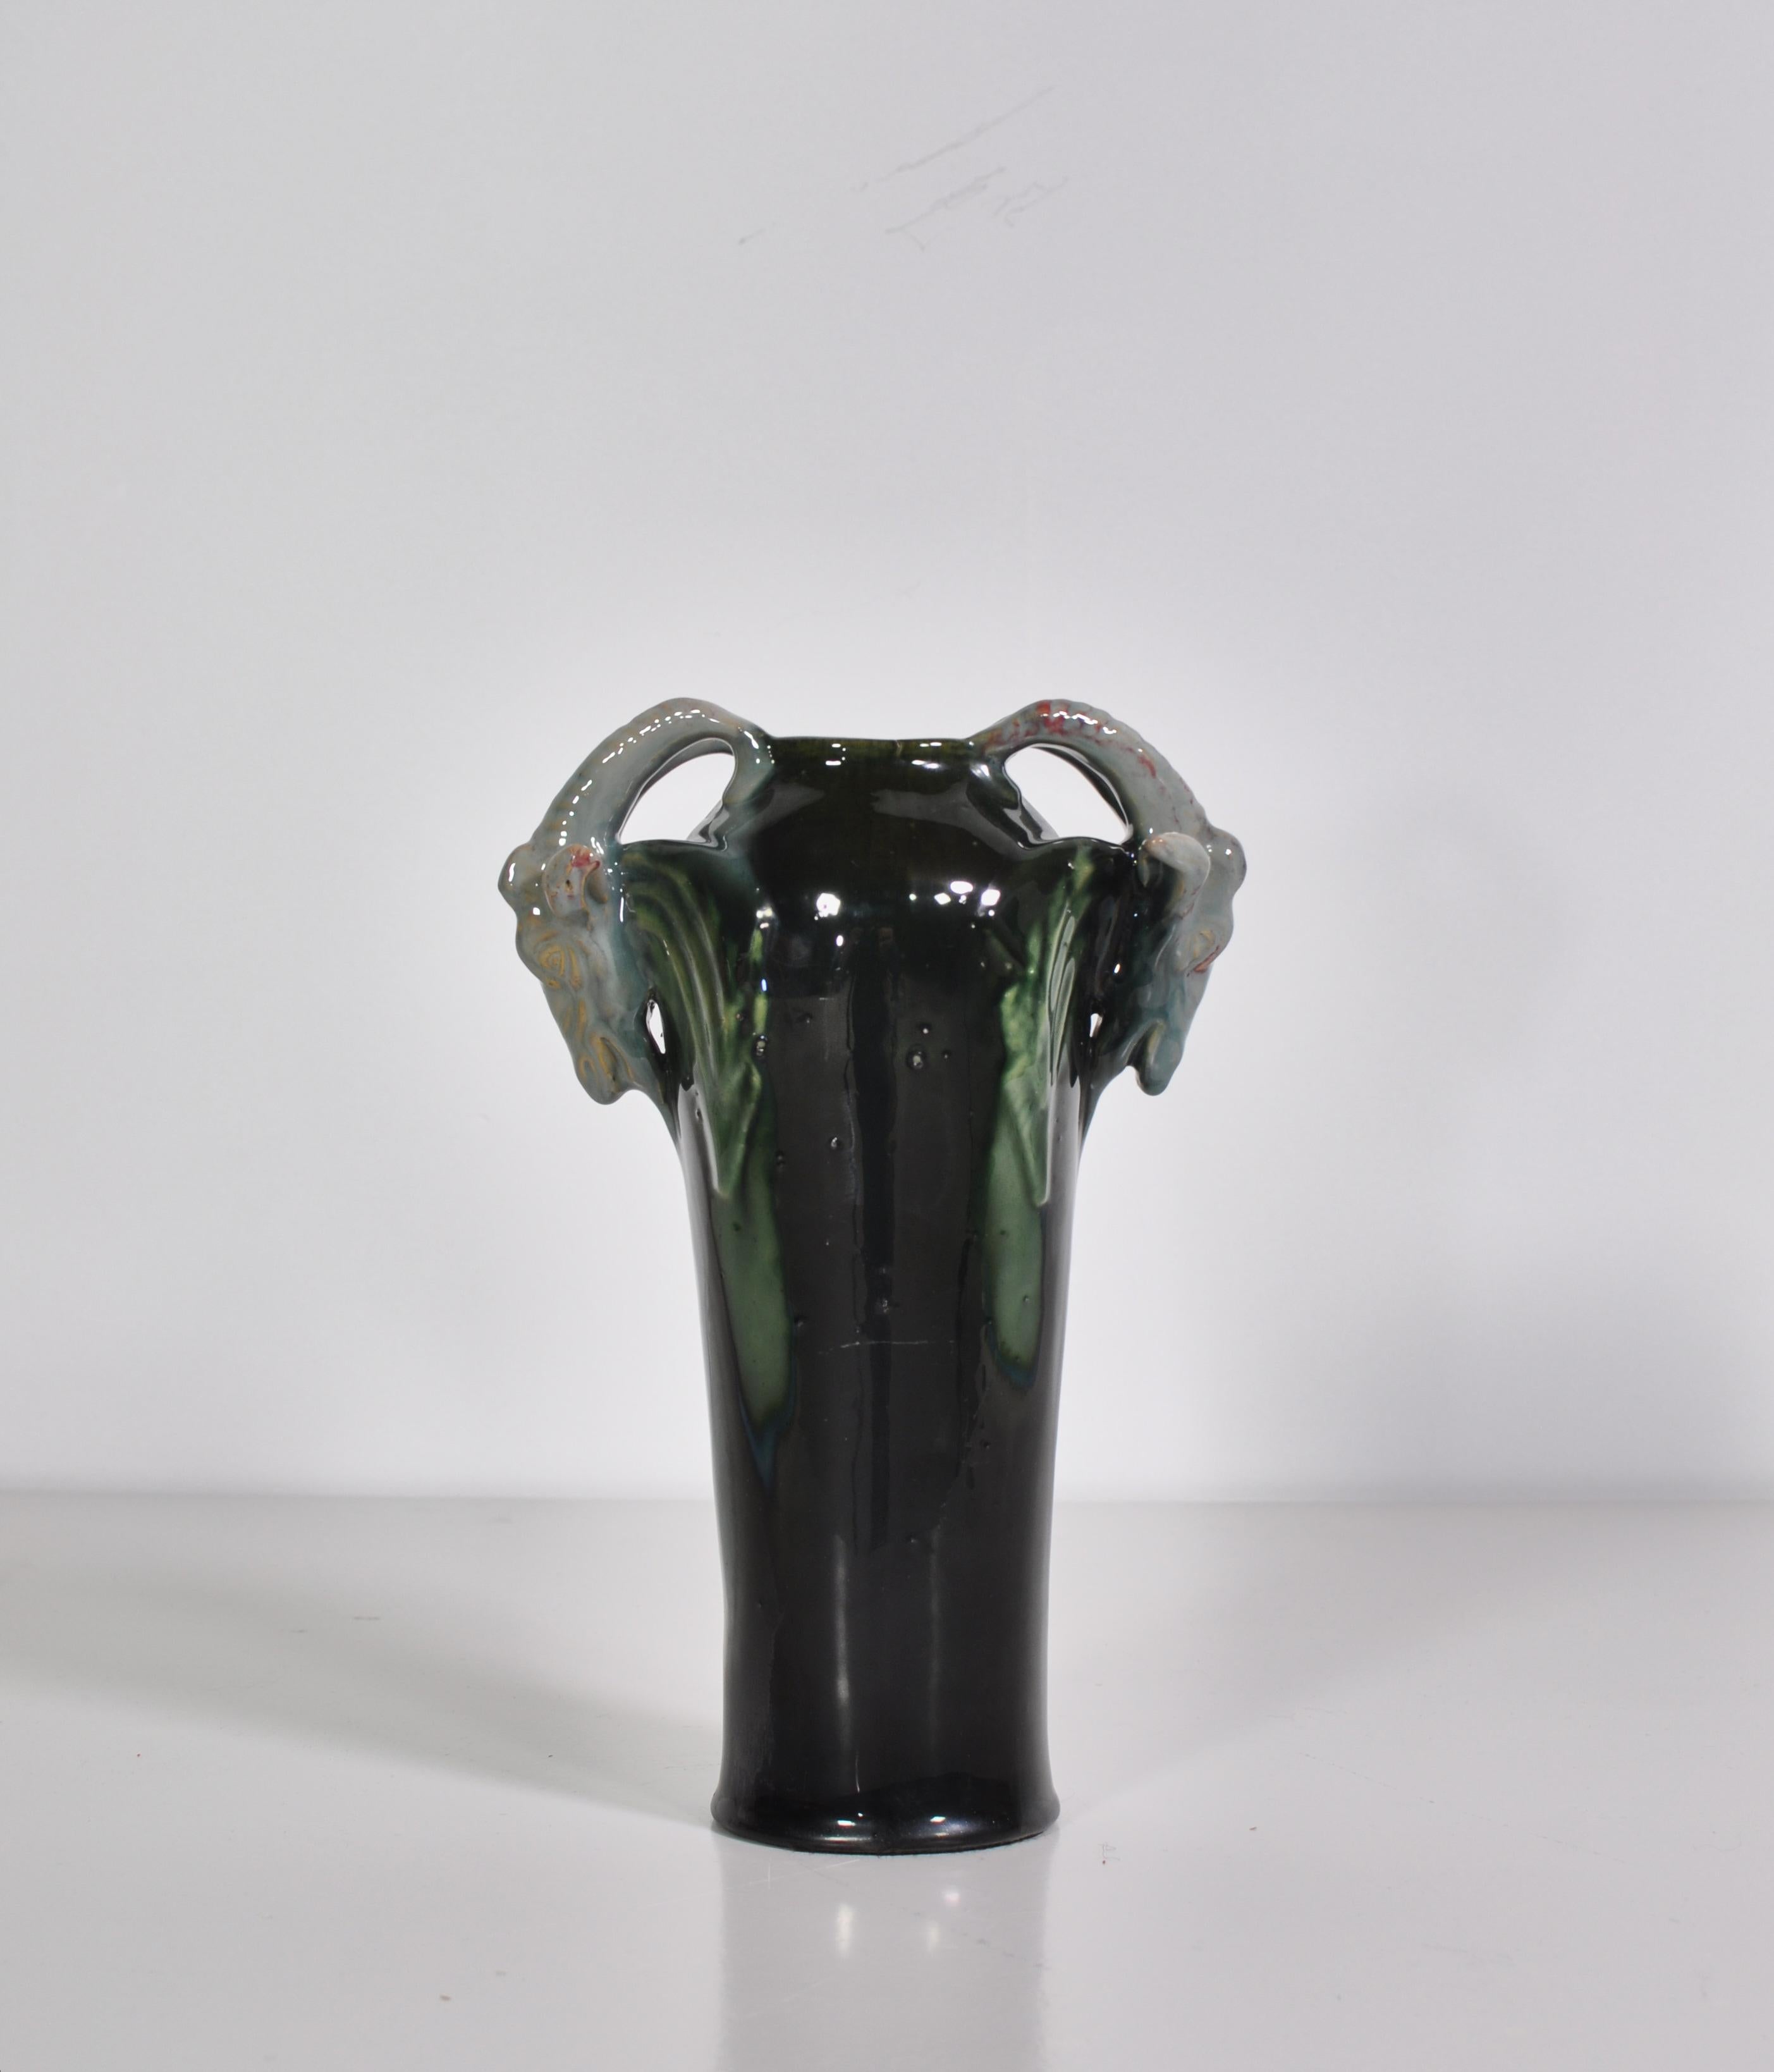 Beautiful Art Nouveau earthenware vase made at Michael Andersen & Son in the 1920s. The vase features a stunning lustre glaze in light blue, black and turquoise colors and are decorated with rams heads. Great condition and stamped by maker: 